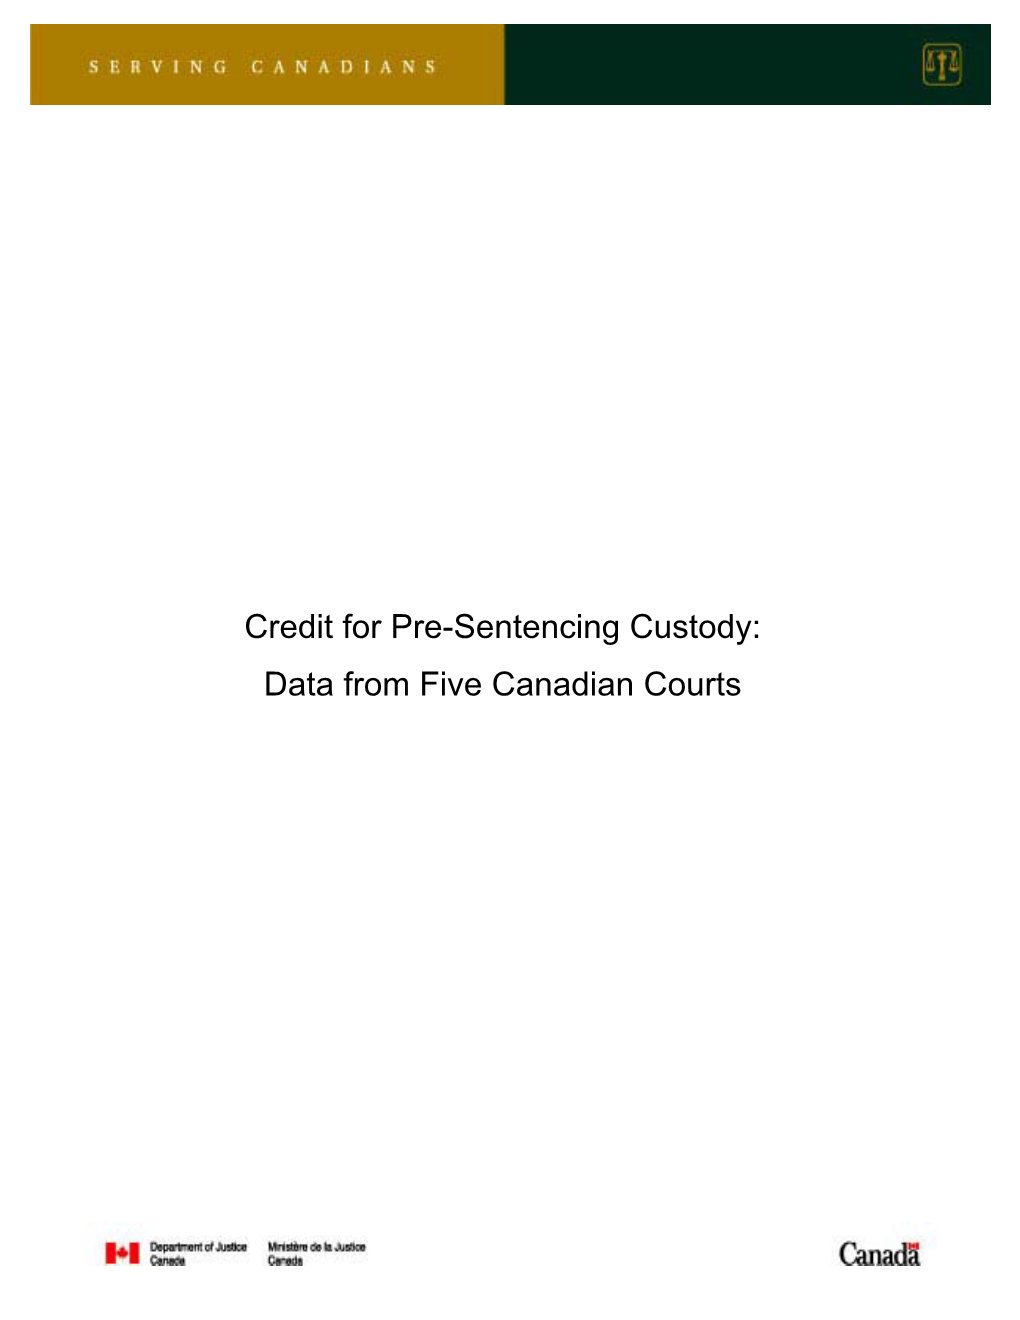 Credit for Pre-Sentencing Custody: Data from Five Canadian Courts